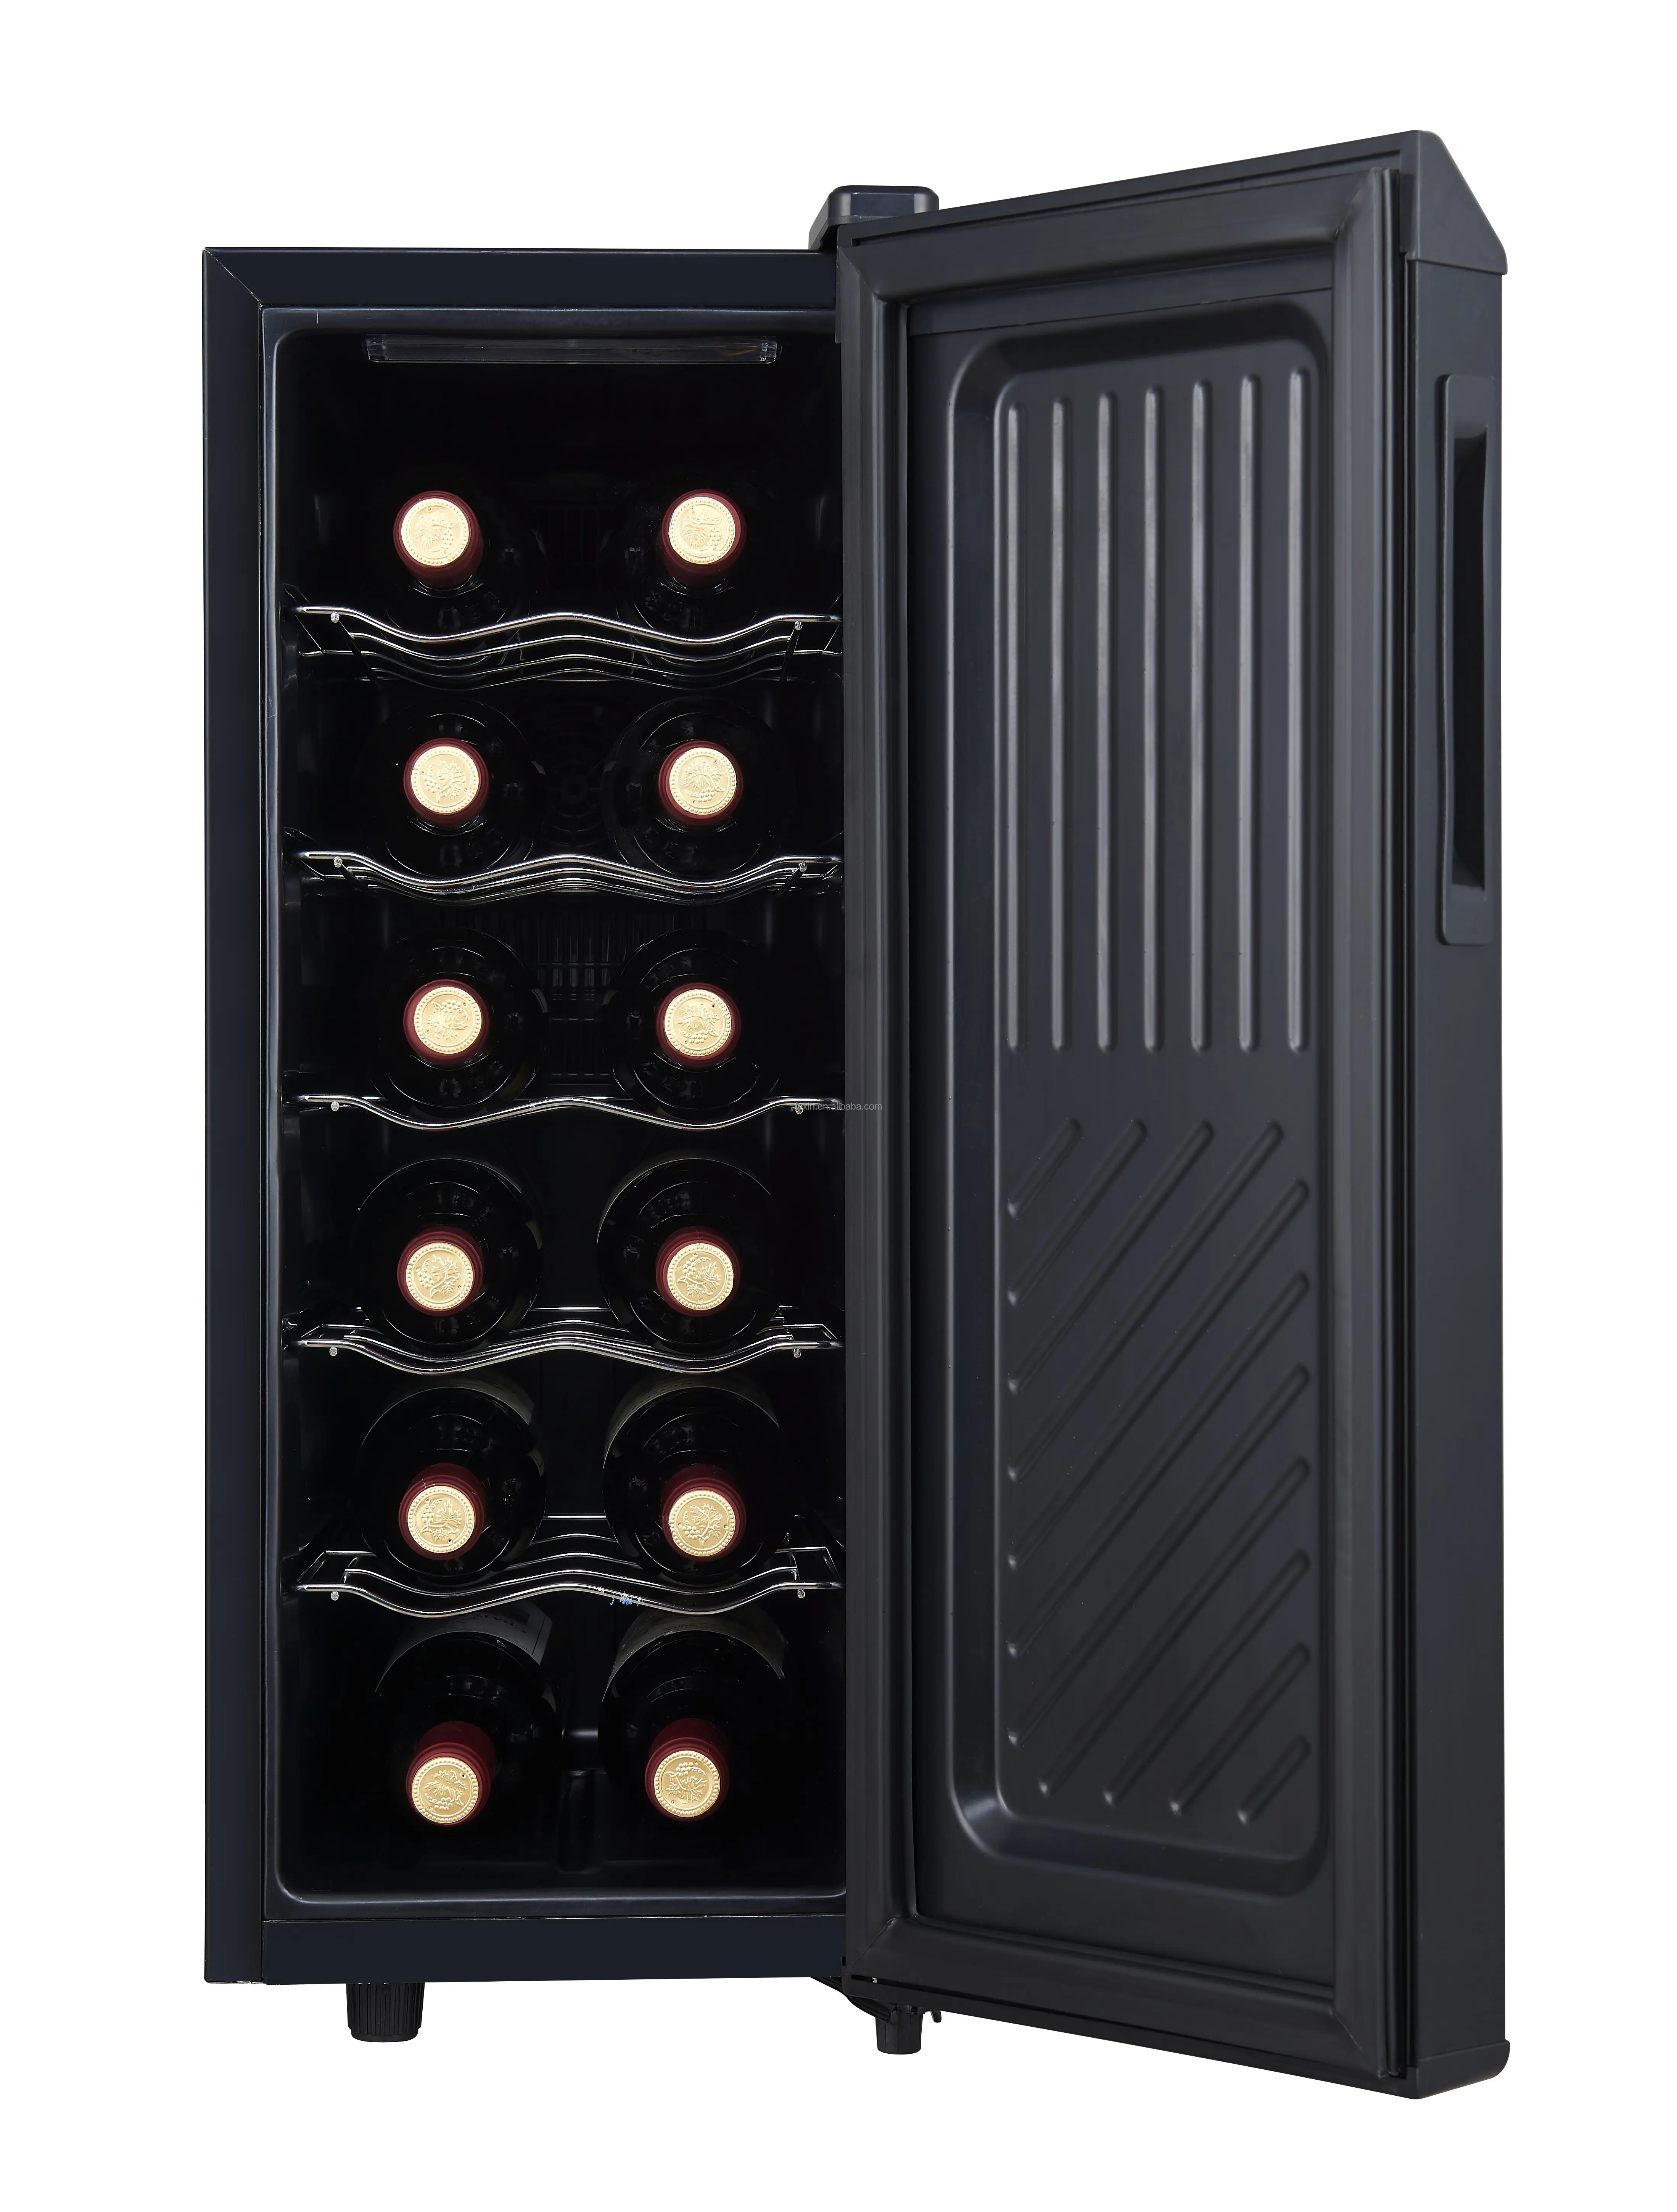 DOE Thermoelectric Wine Cooler for Home Use